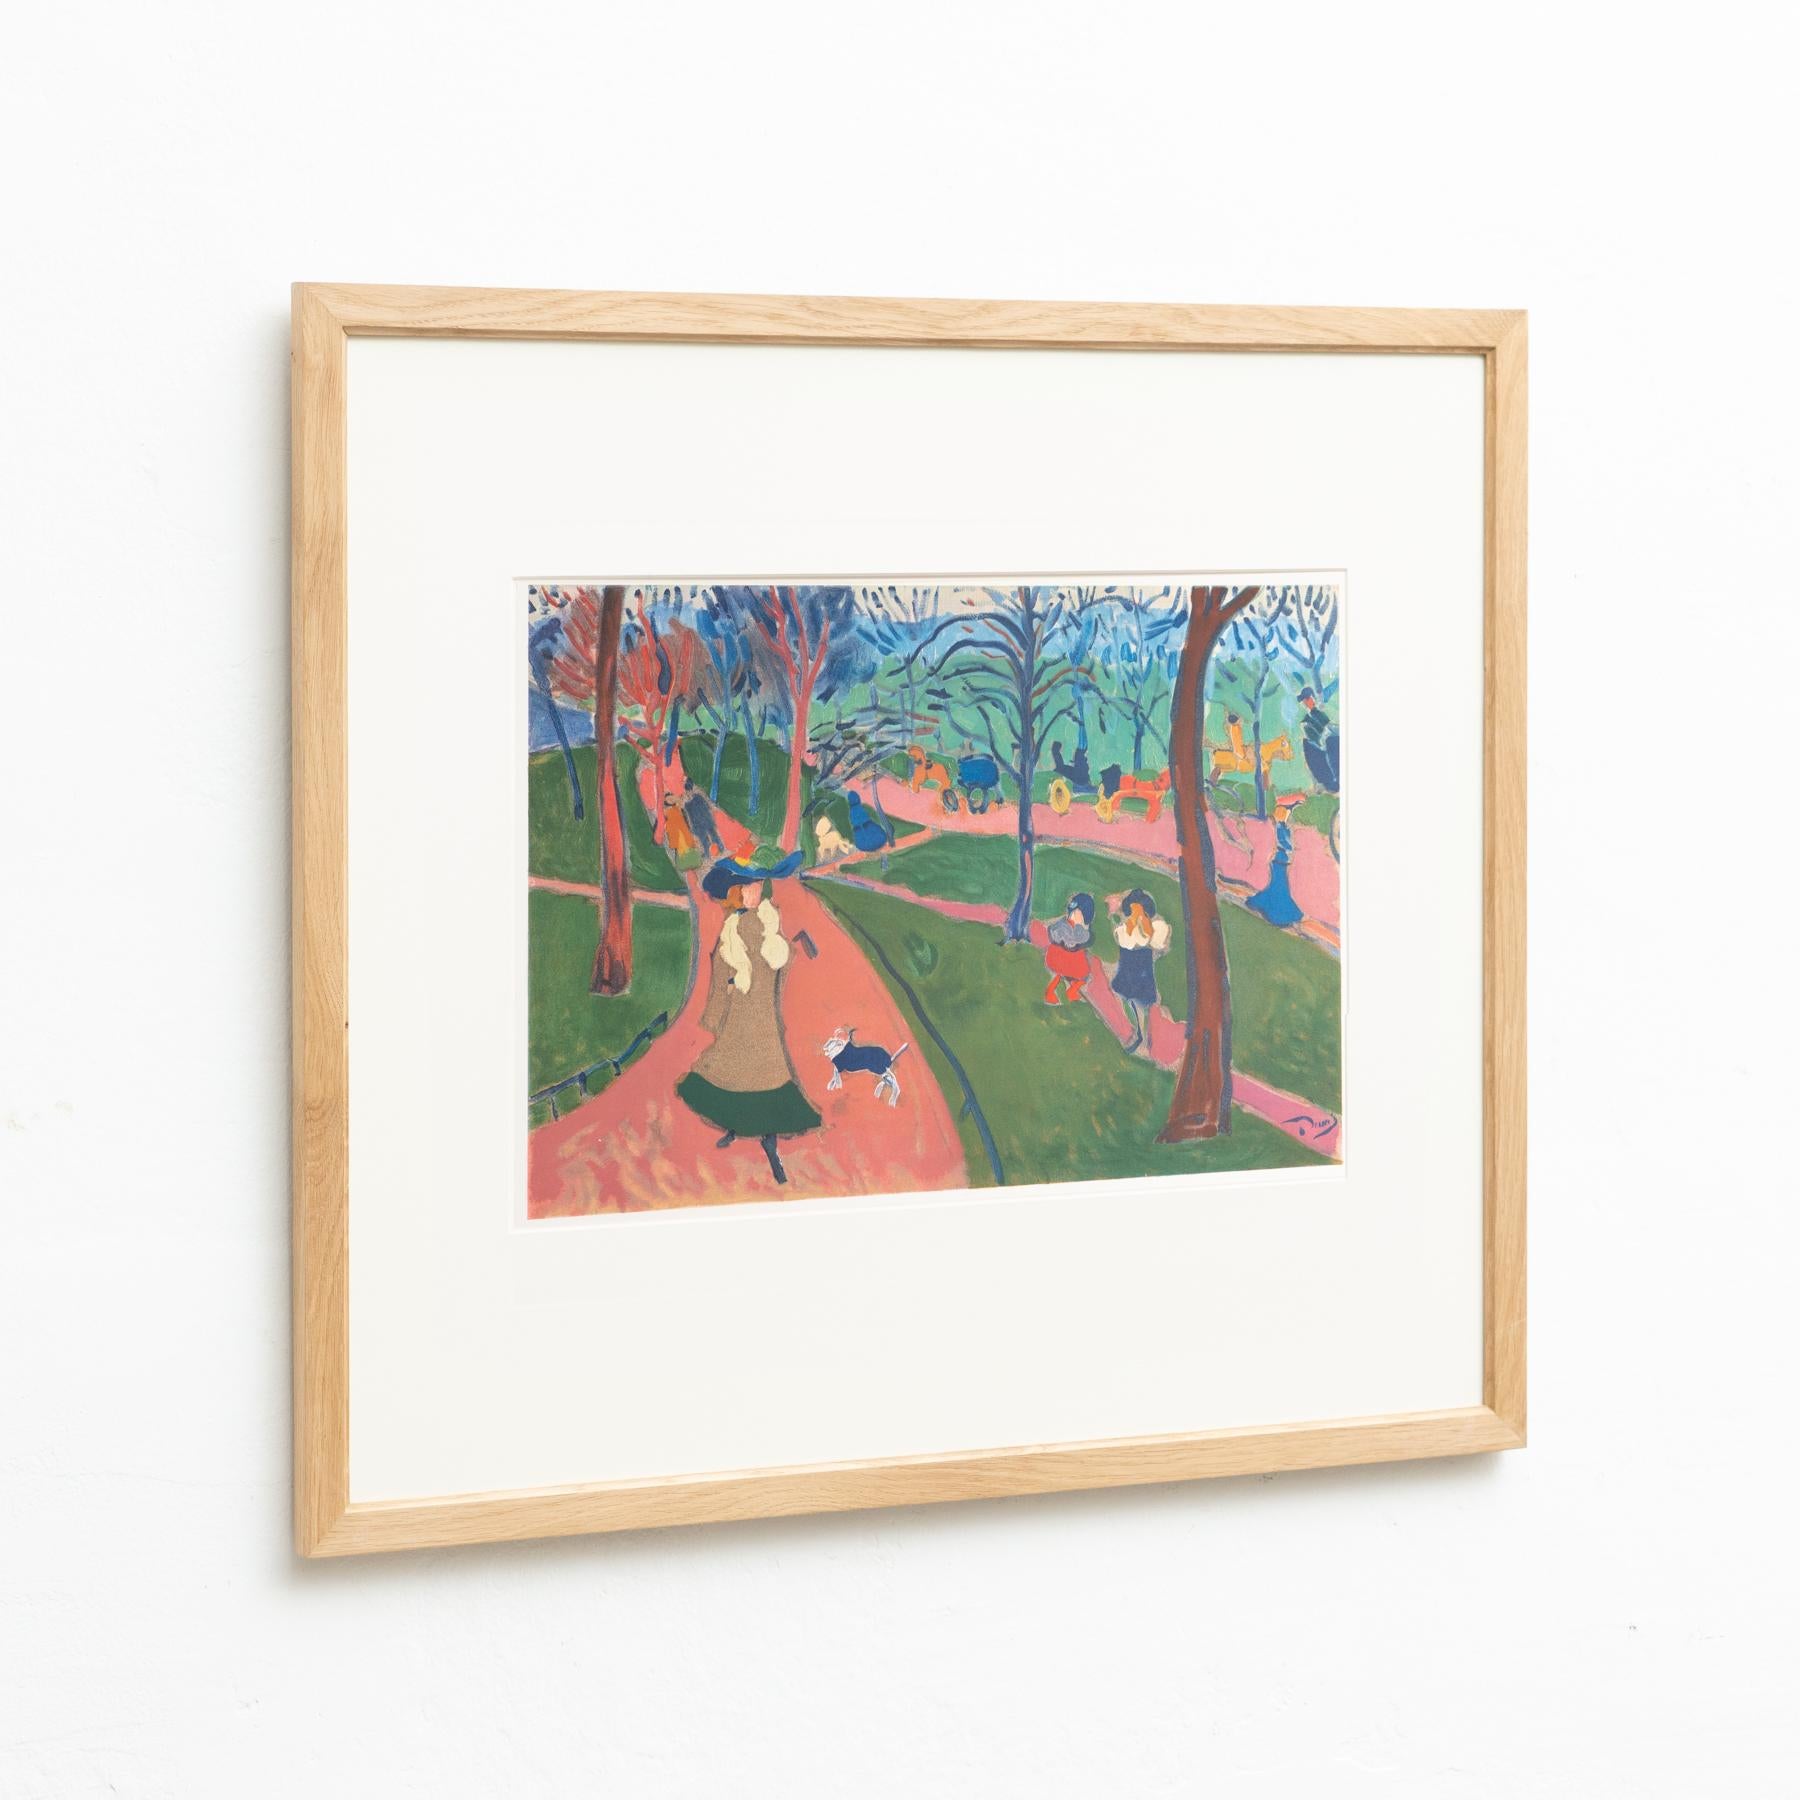 Modern André Derain Framed 'Hyde Park' Color Lithography, circa 1972 For Sale